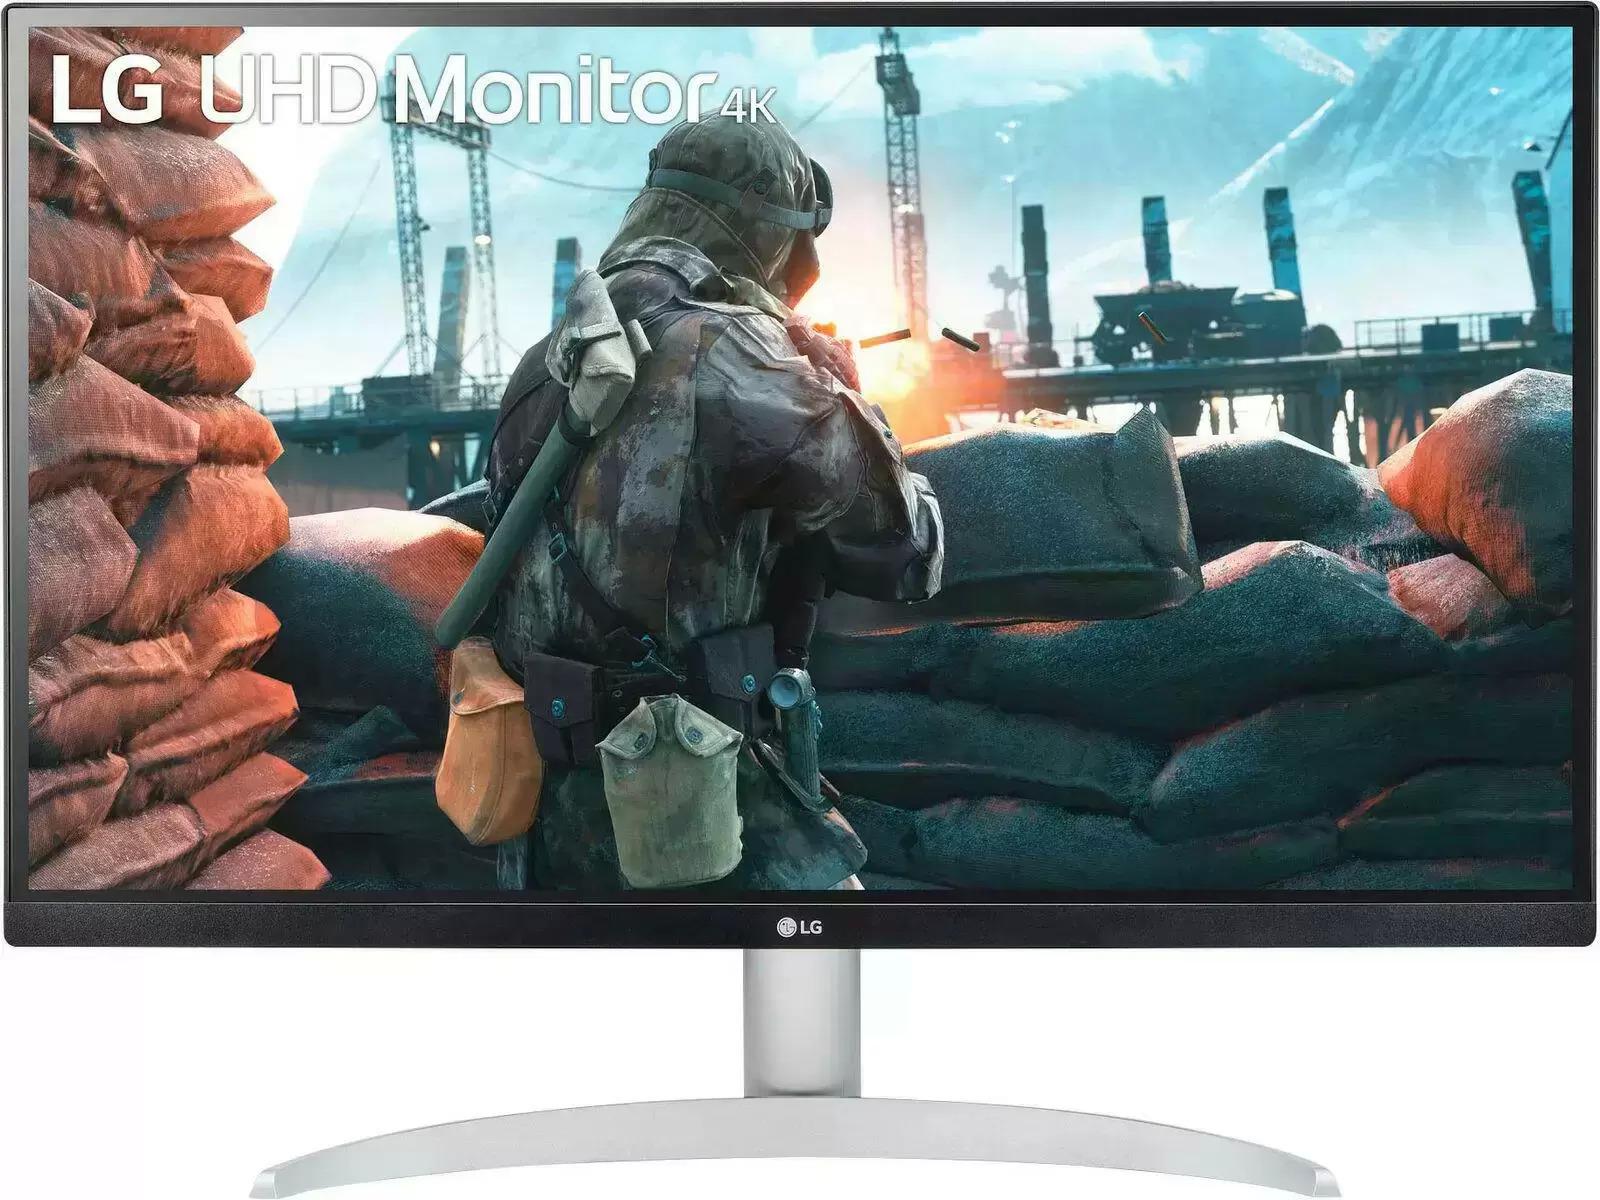 27in LG LED 4k UHD AMD Monitor with HDR for $229.99 Shipped